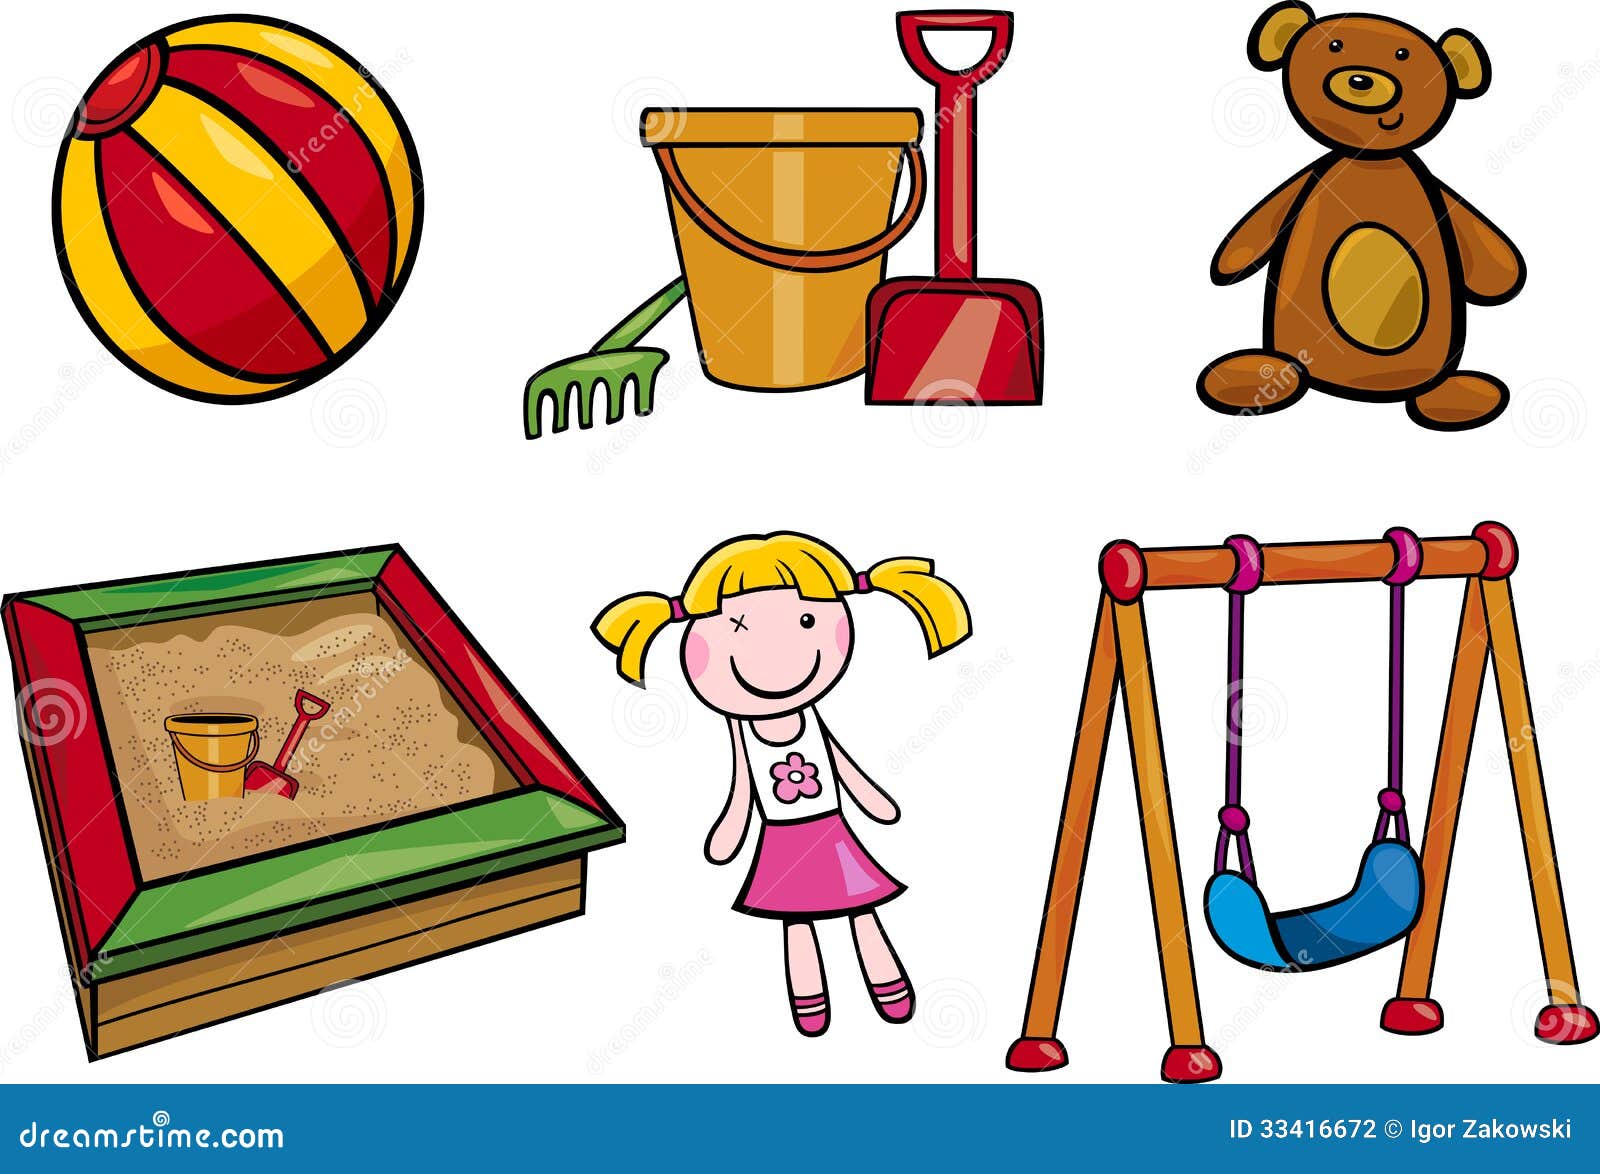 clipart school objects - photo #48